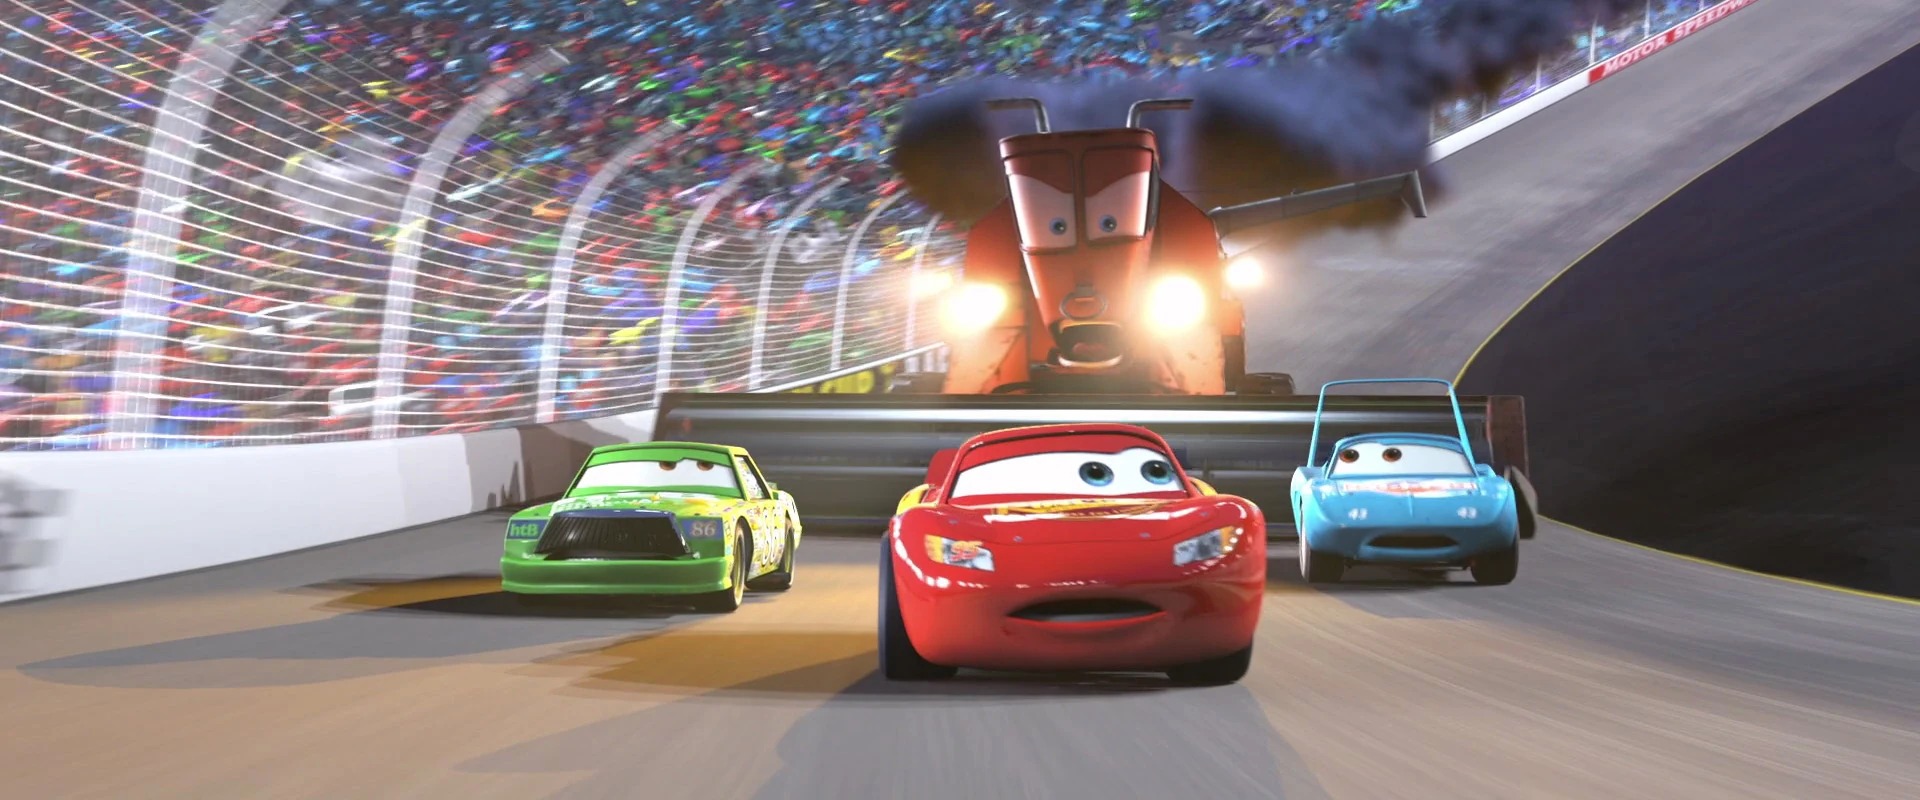 Frank chasing McQueen and racers Blank Meme Template